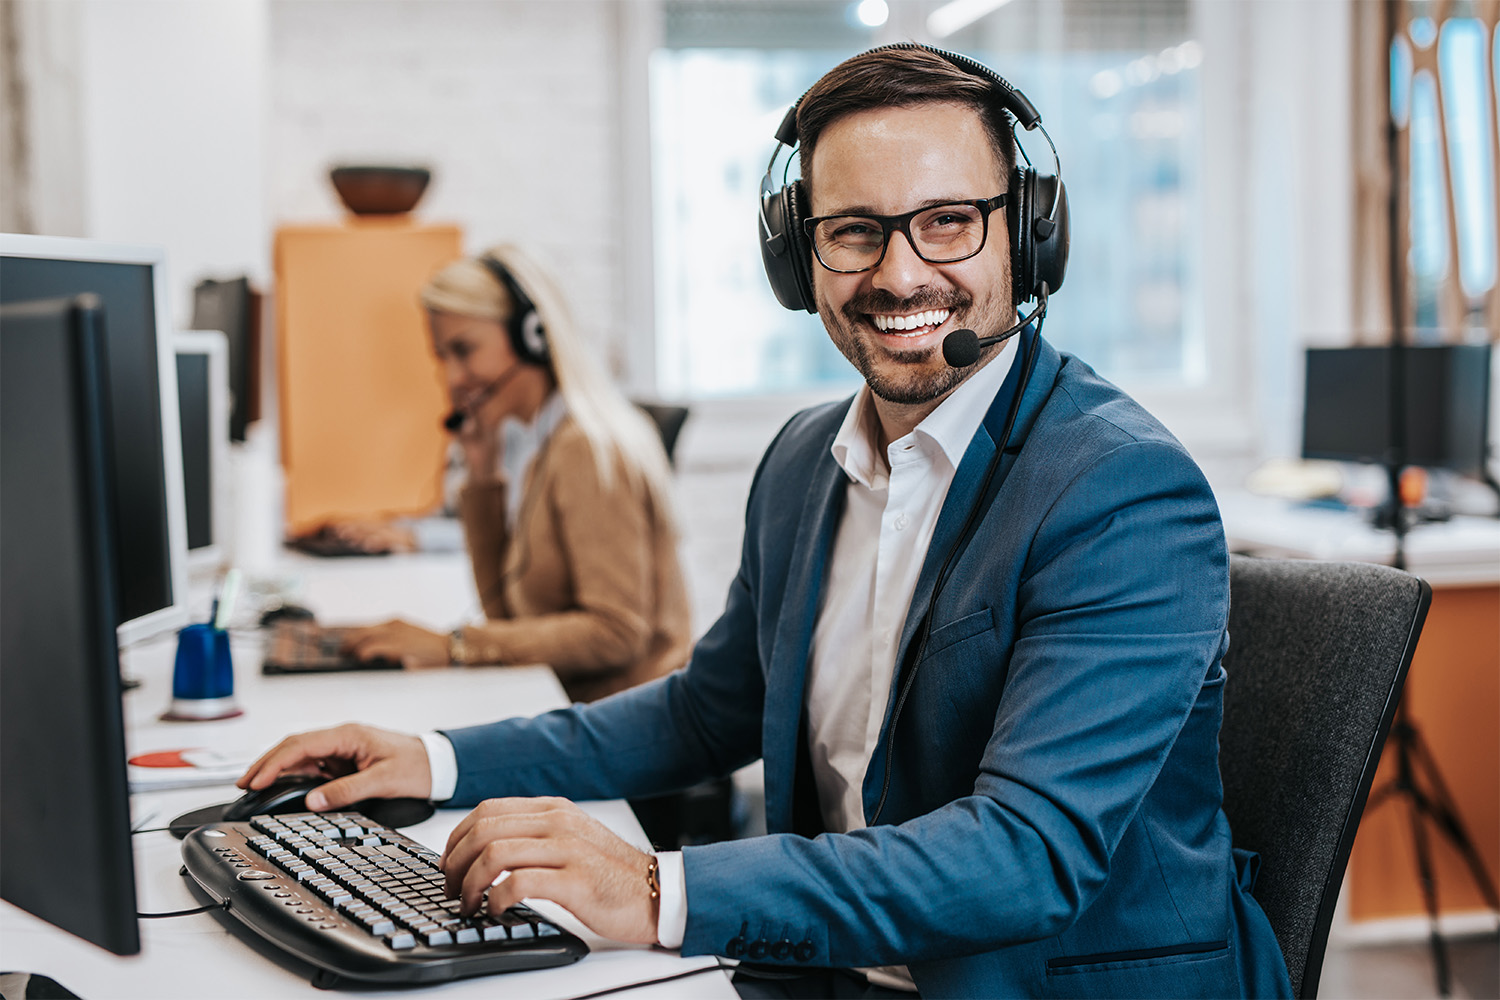 What’s the Difference Between a Call Center and Telemarketing?